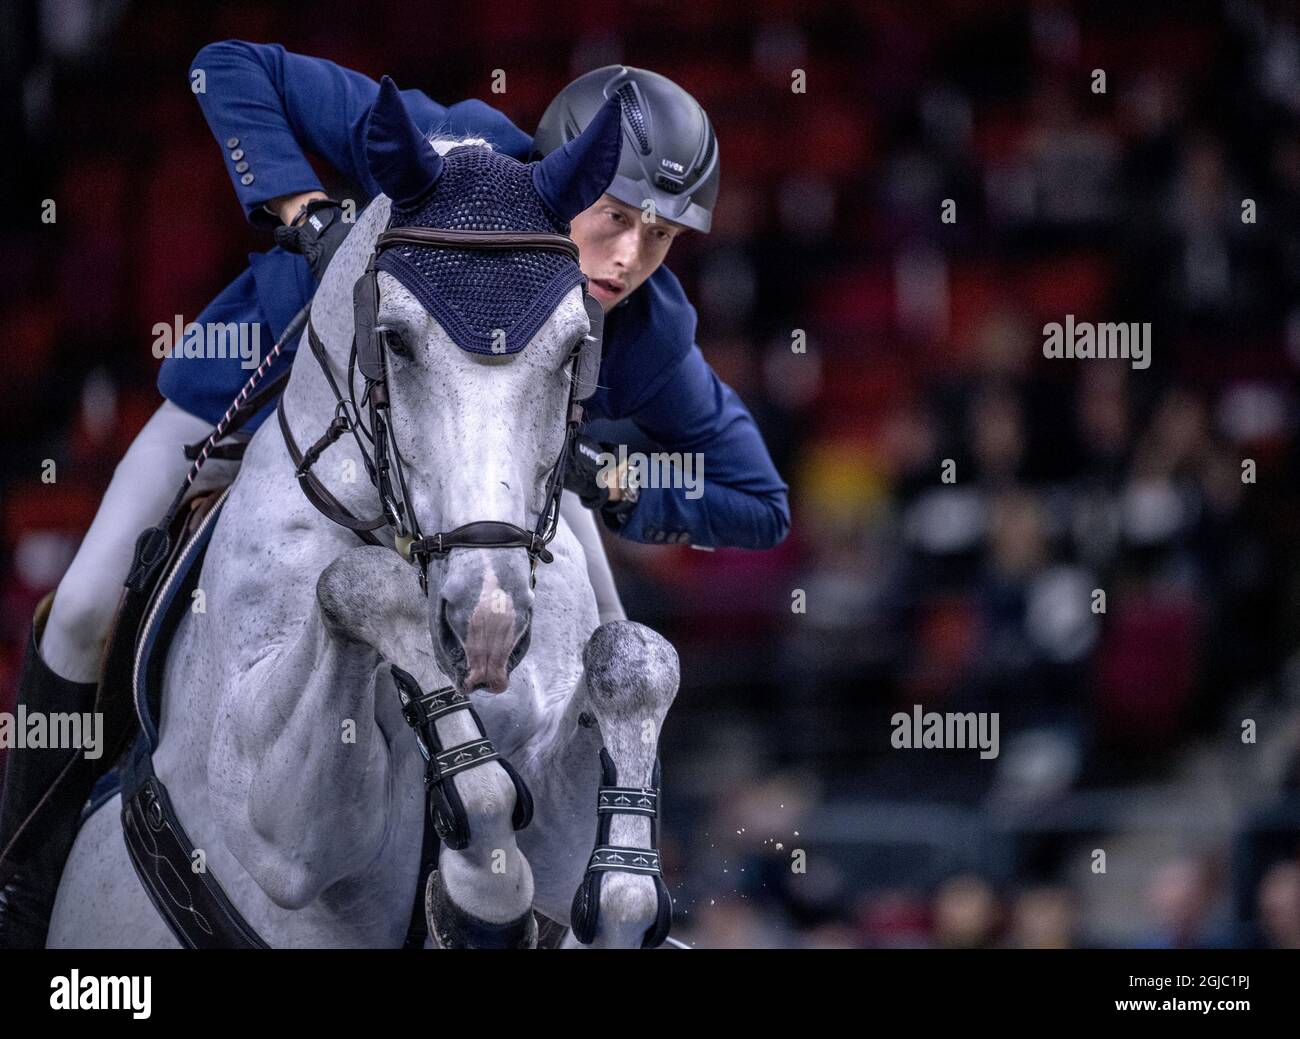 Martin Fuchs of Switzerland rides Clooney 51 during FEI World Cup final 1 show jumping event at Gothenburg Horse Show in Scandinavium Arena April 4, 2019. Photo Bjorn Larsson Rosvall / TT kod 9200 Stock Photo